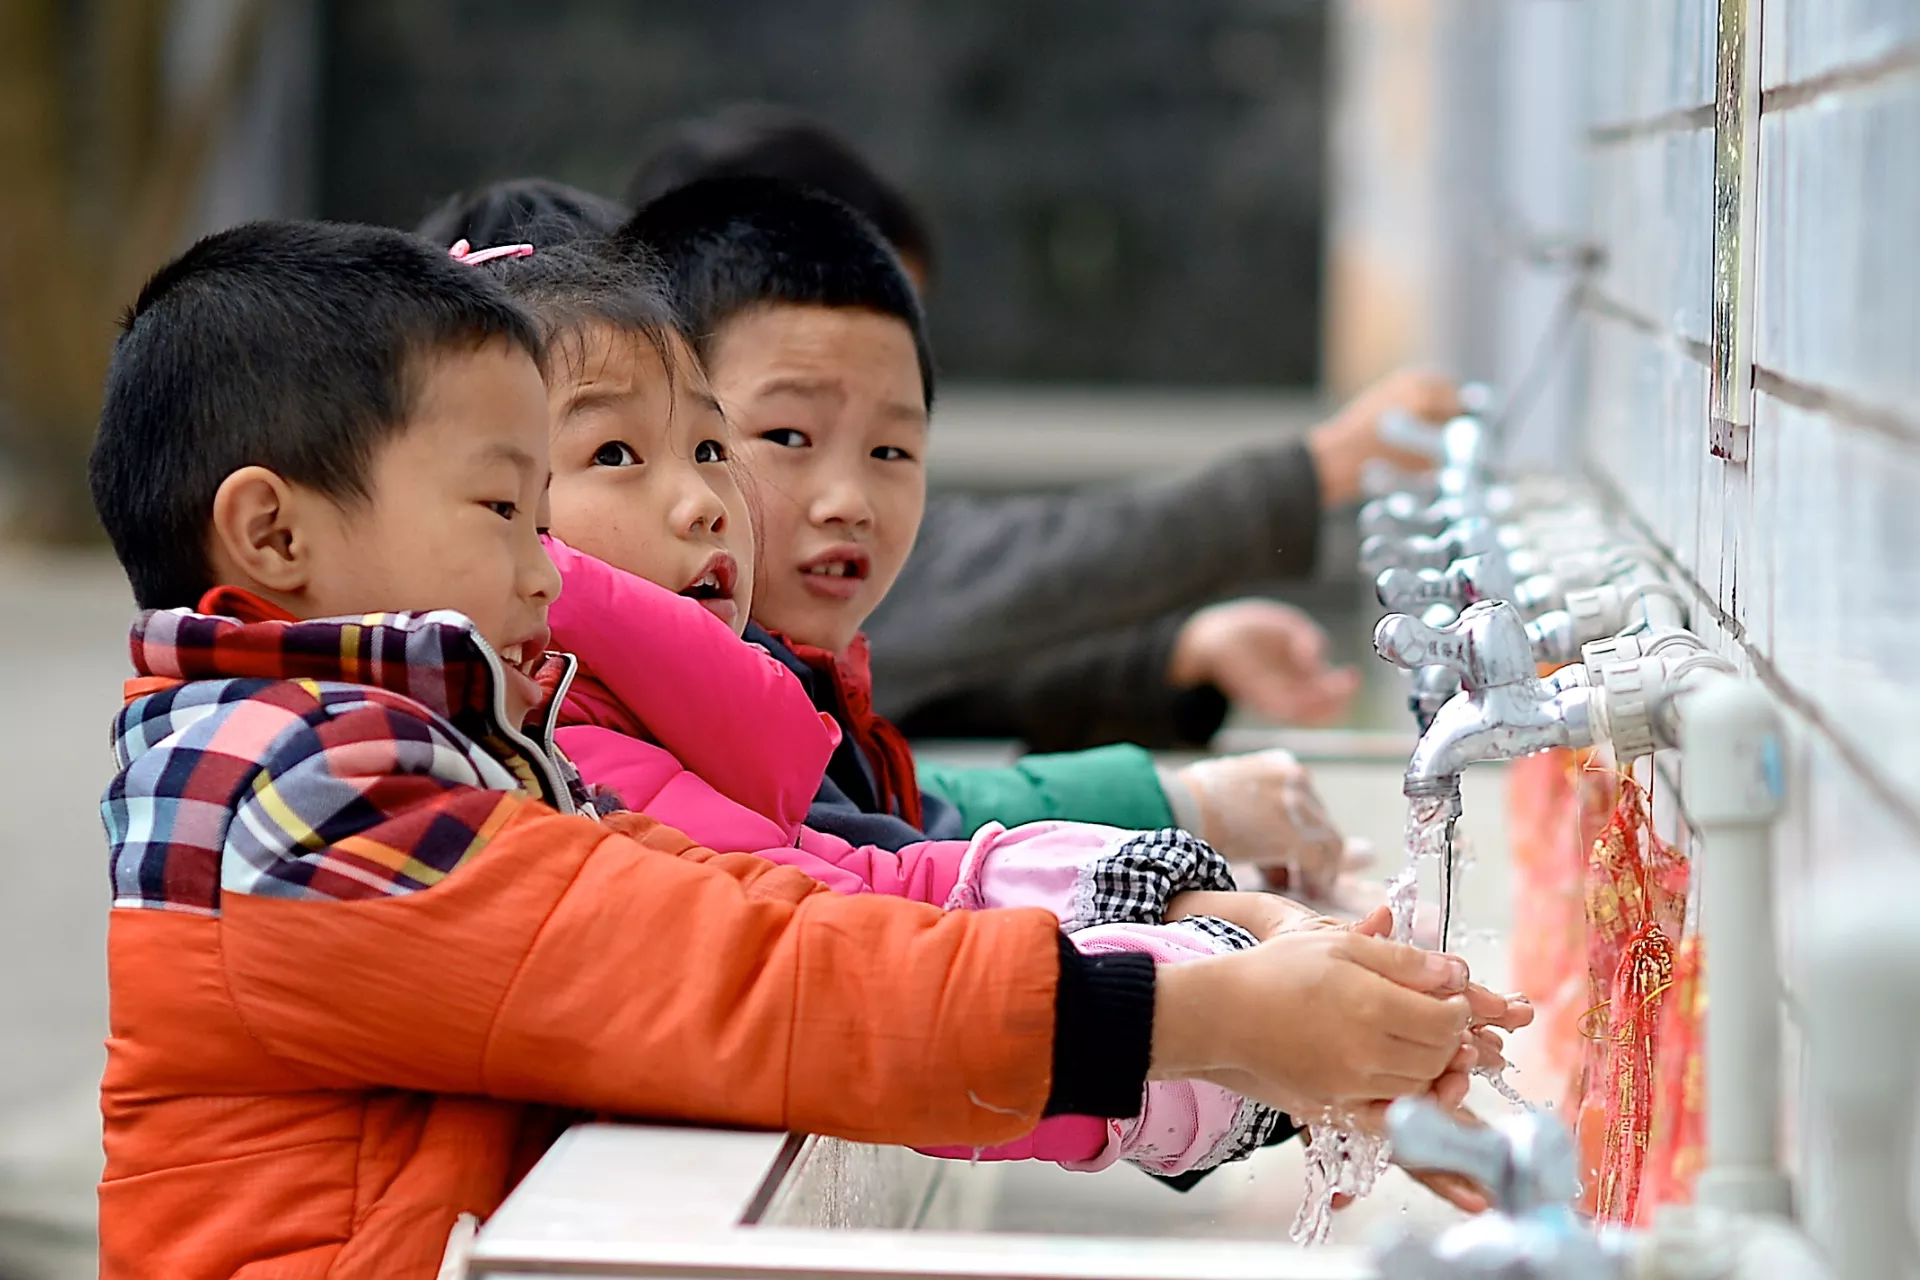 Children wash their hands at a school in Zhong County, Chongqing, in 2015.